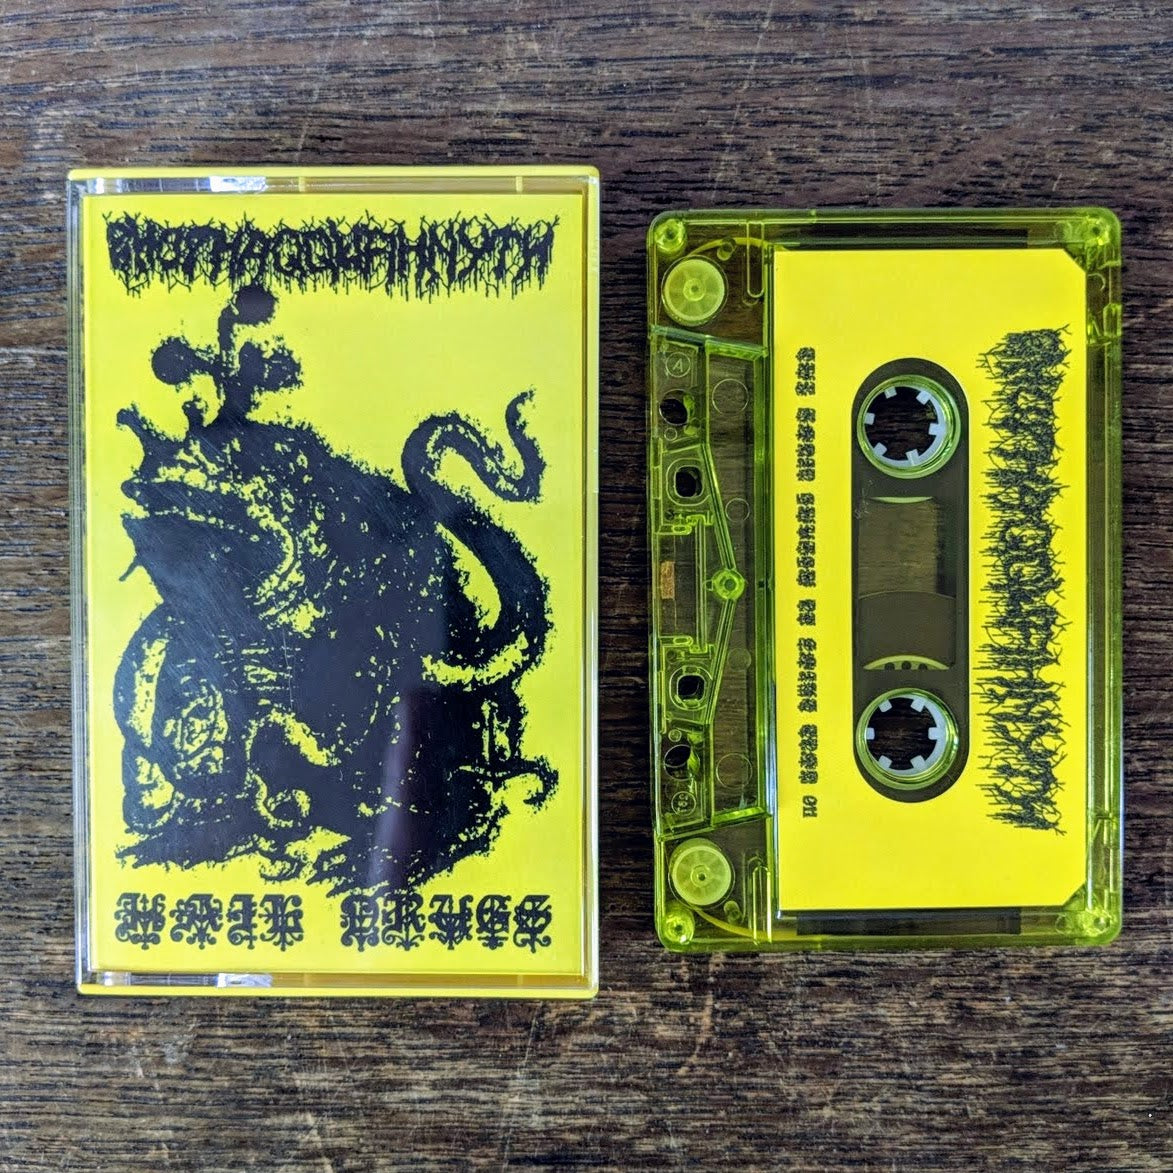 [SOLD OUT] ZHOTHAQQUAHNYTH "Hail Drugs" Cassette Tape